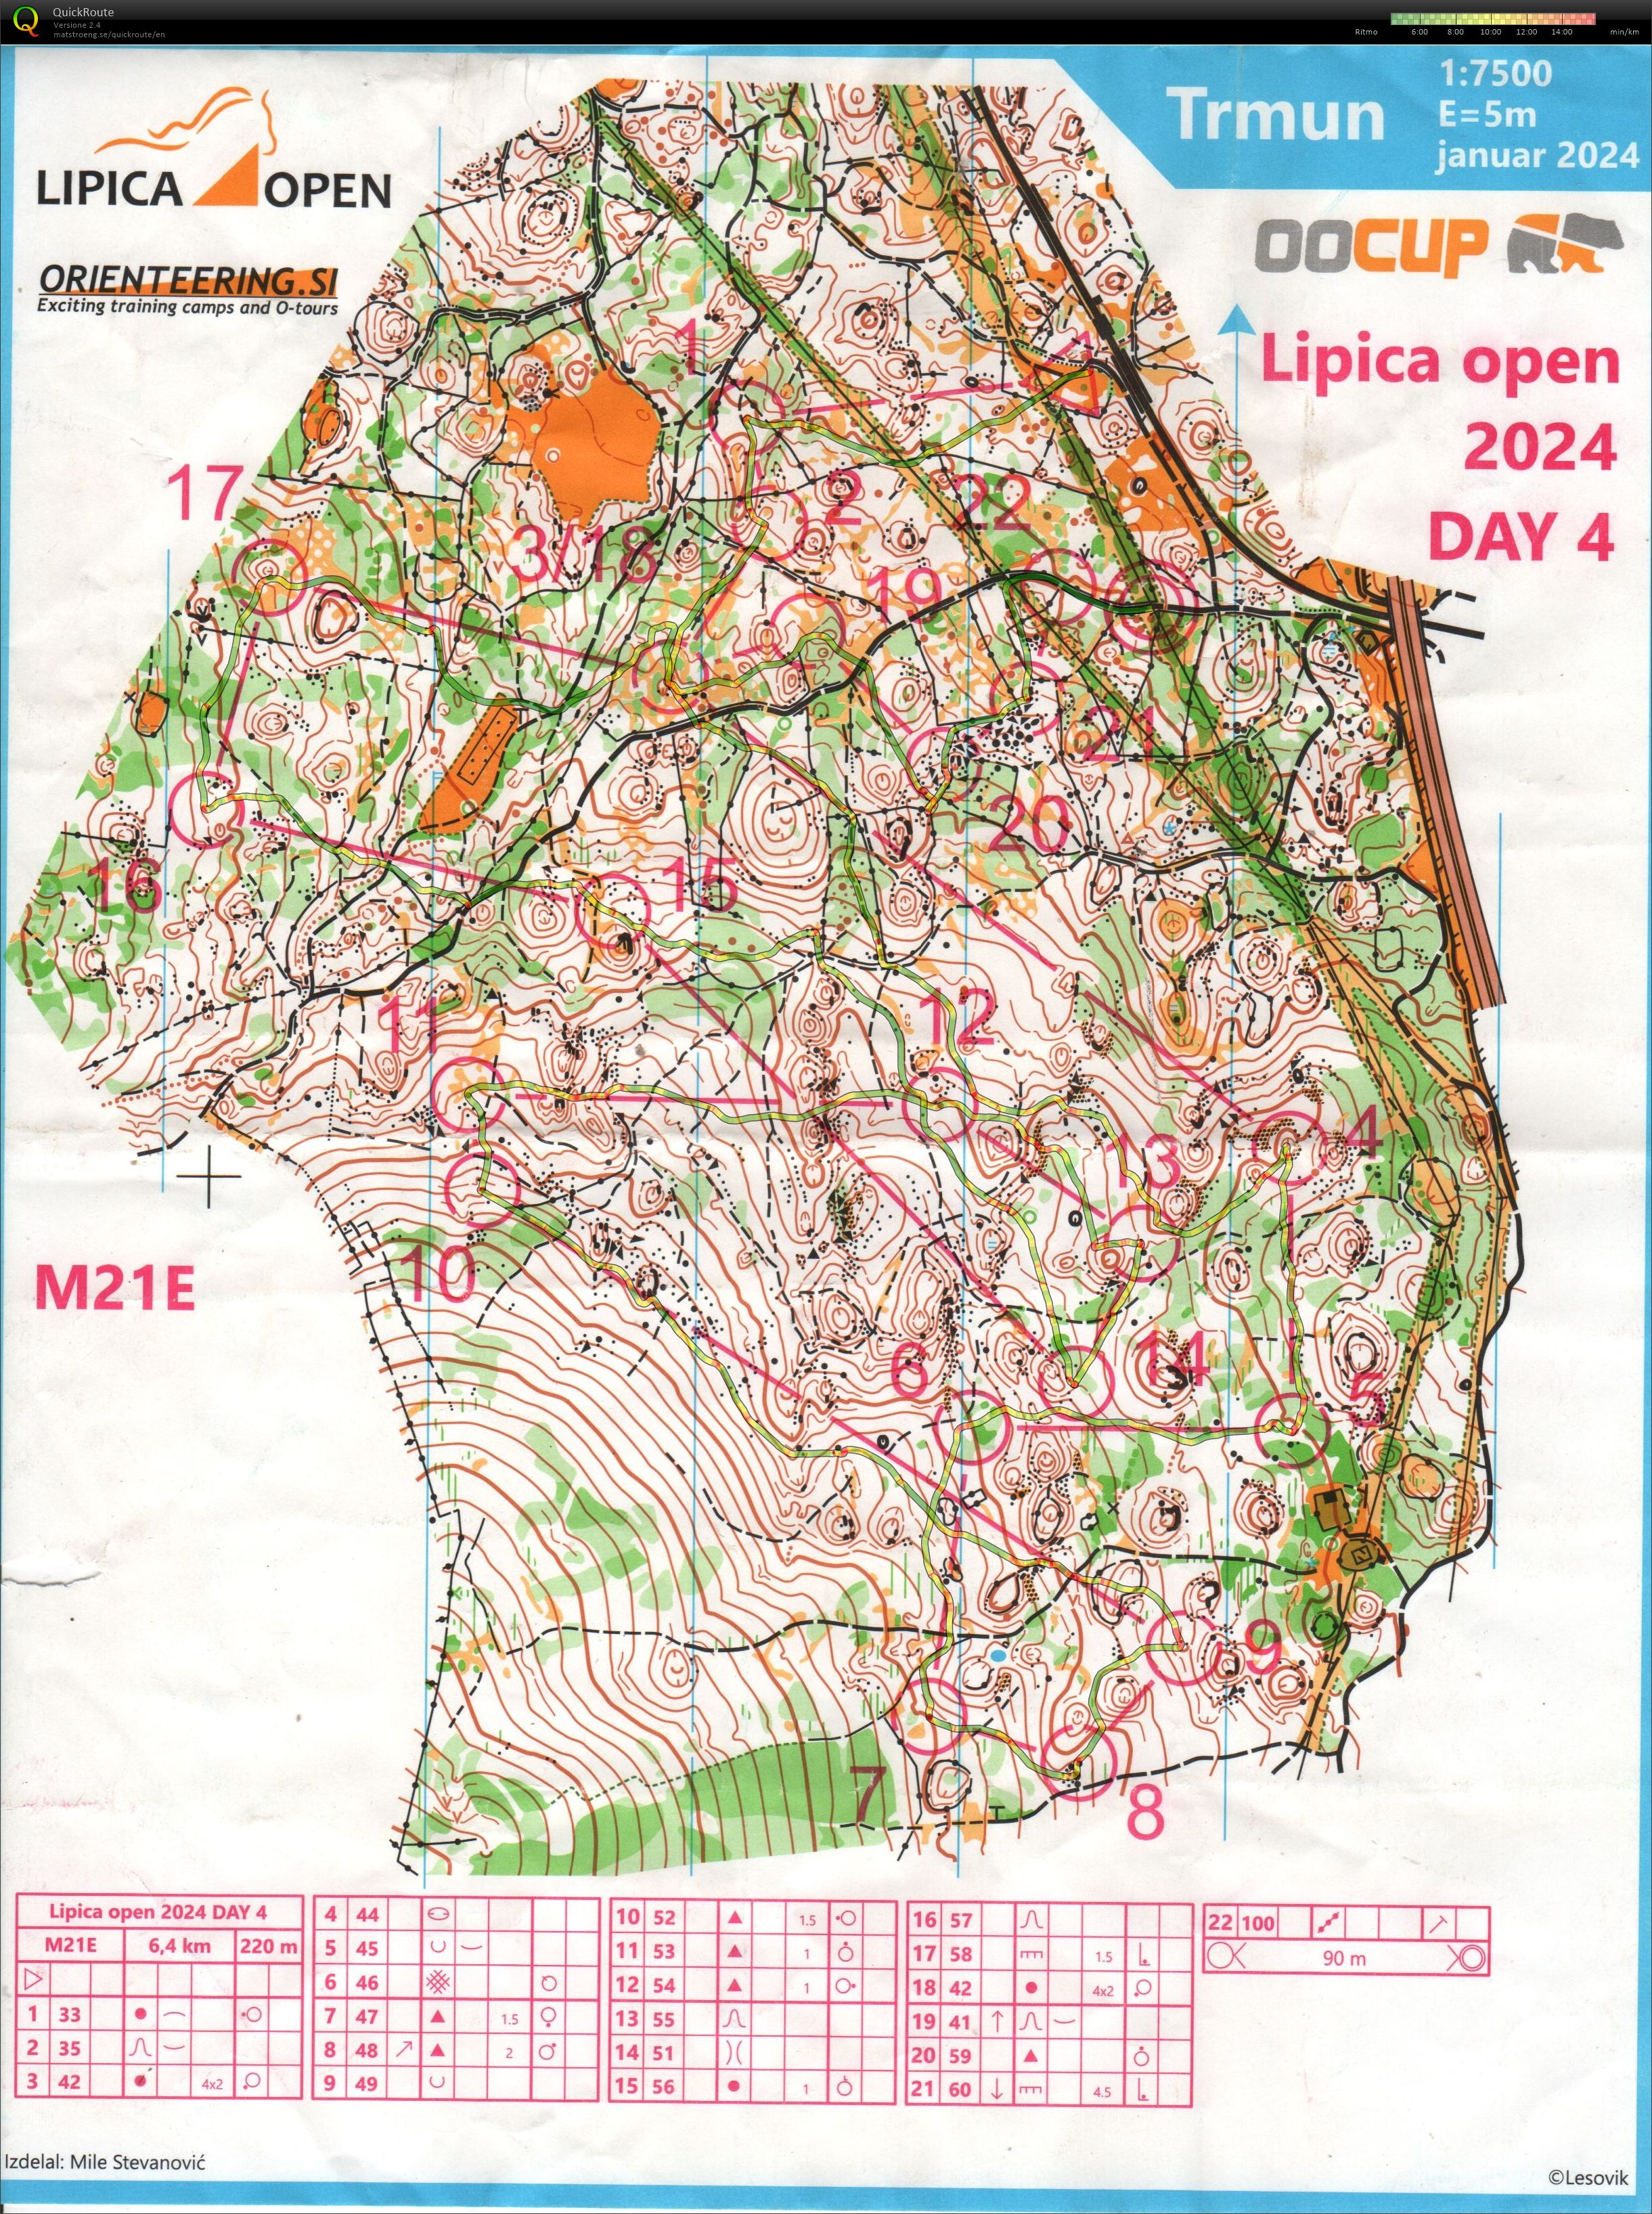 Lipica Open 2024 - day 4 (12/03/2024)